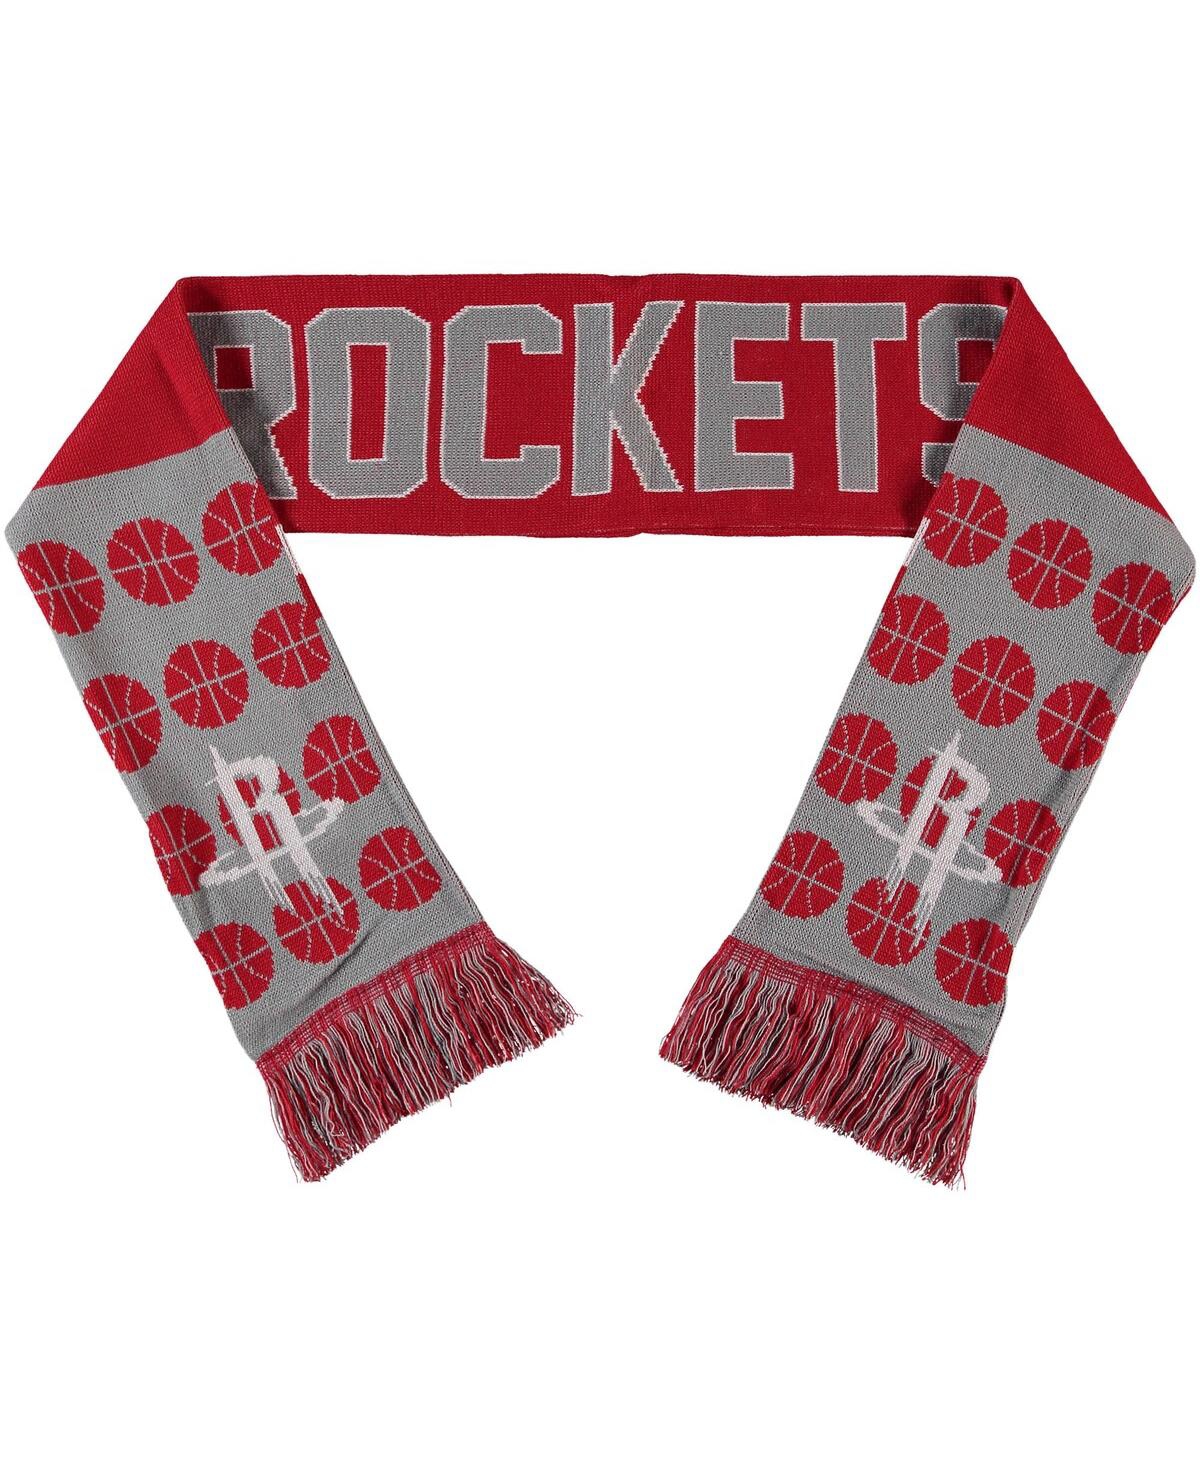 Men's and Women's Foco Houston Rockets Reversible Thematic Scarf - Red, Gray